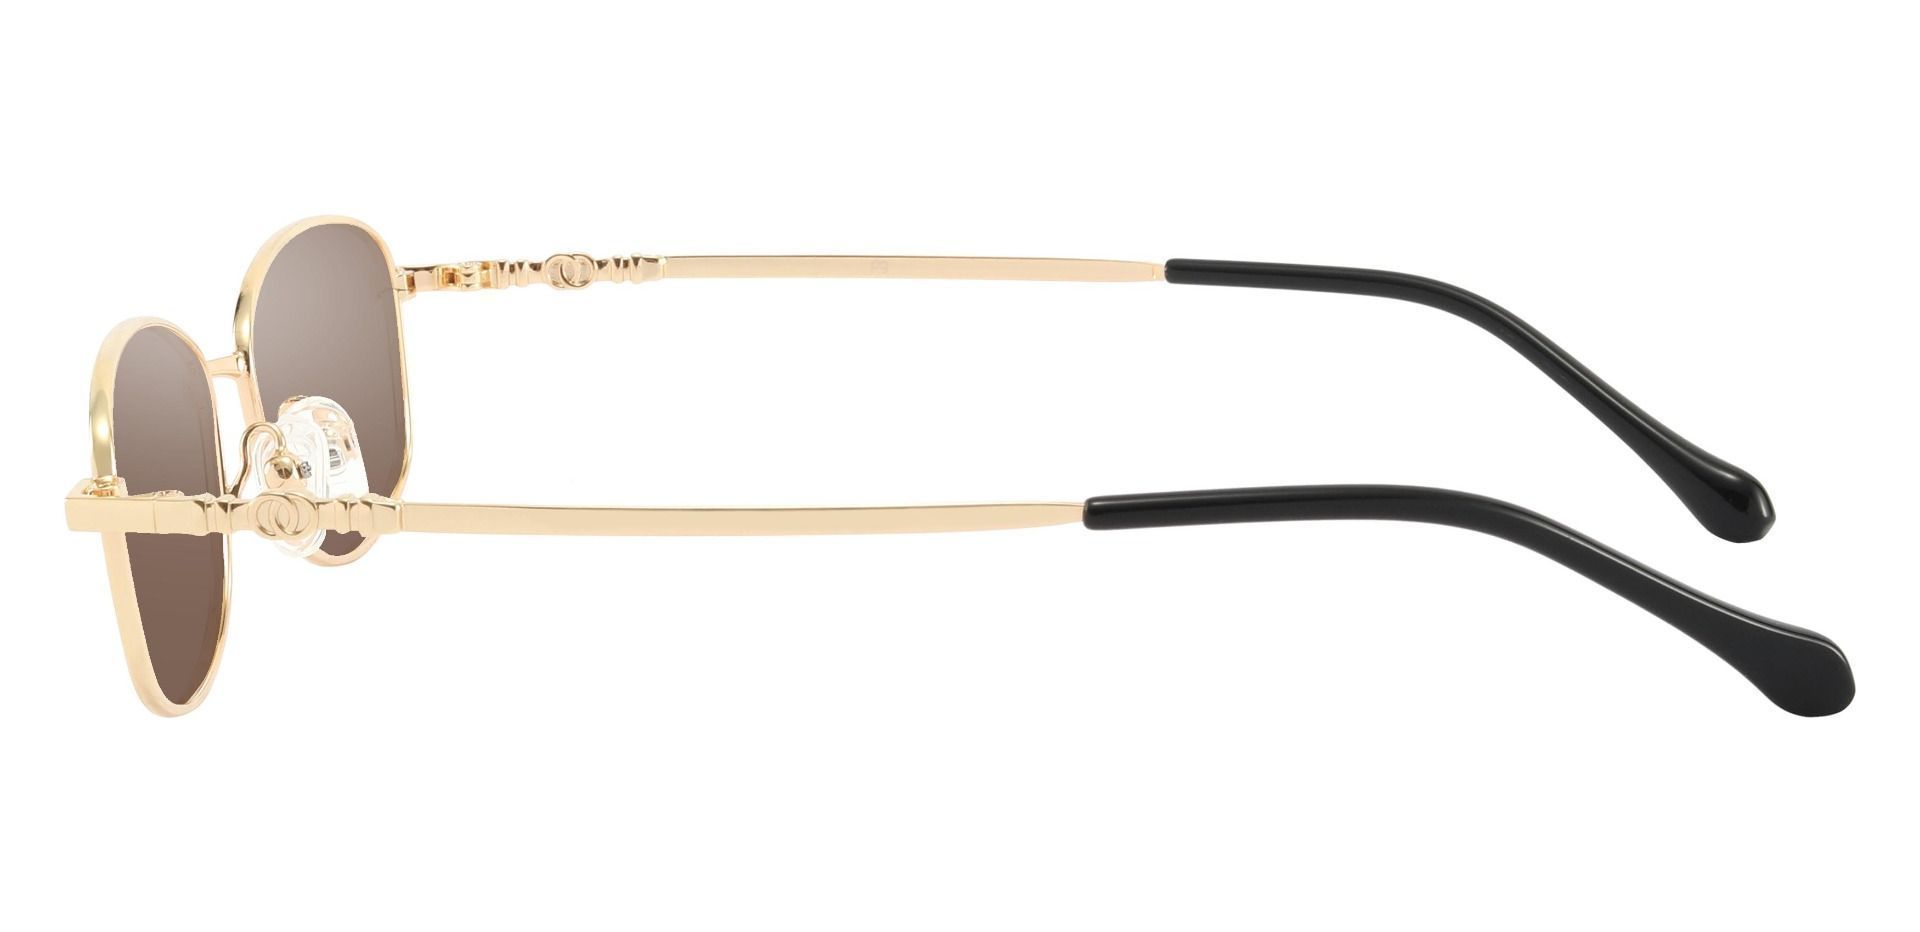 Naples Rectangle Non-Rx Sunglasses - Gold Frame With Brown Lenses